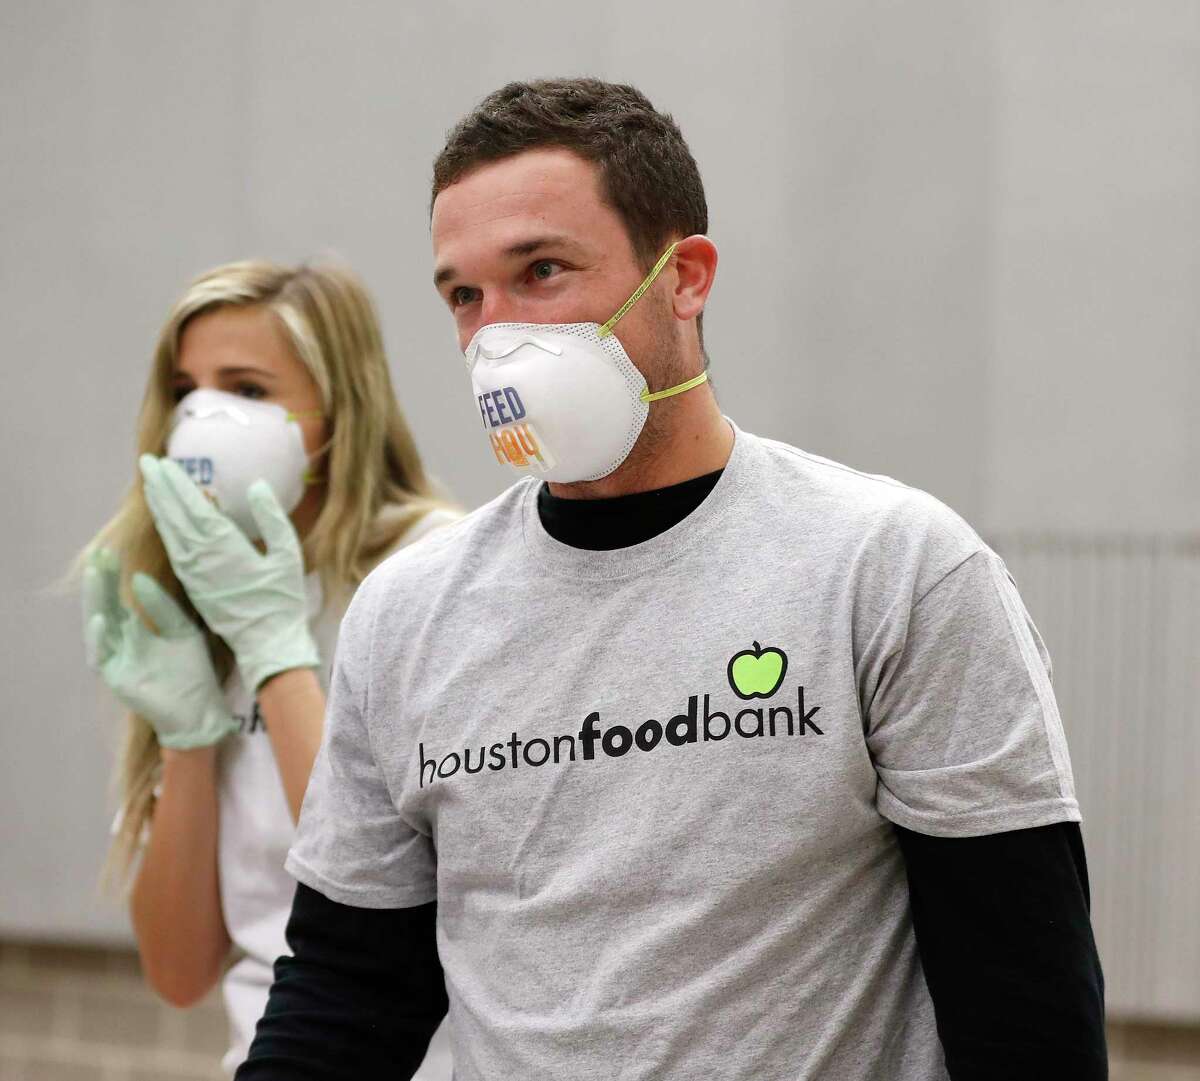 Houston Astros Alex Bregman and his fiancee, Reagan Howard prepare to start packaging sustainable kids meals at the Houston Food Bank, in Houston,Friday, April 10, 2020. Bregman launched his FEEDHOU, a $1 million fundraising campaign to help feed Houston-area residents during the coronavirus pandemic.